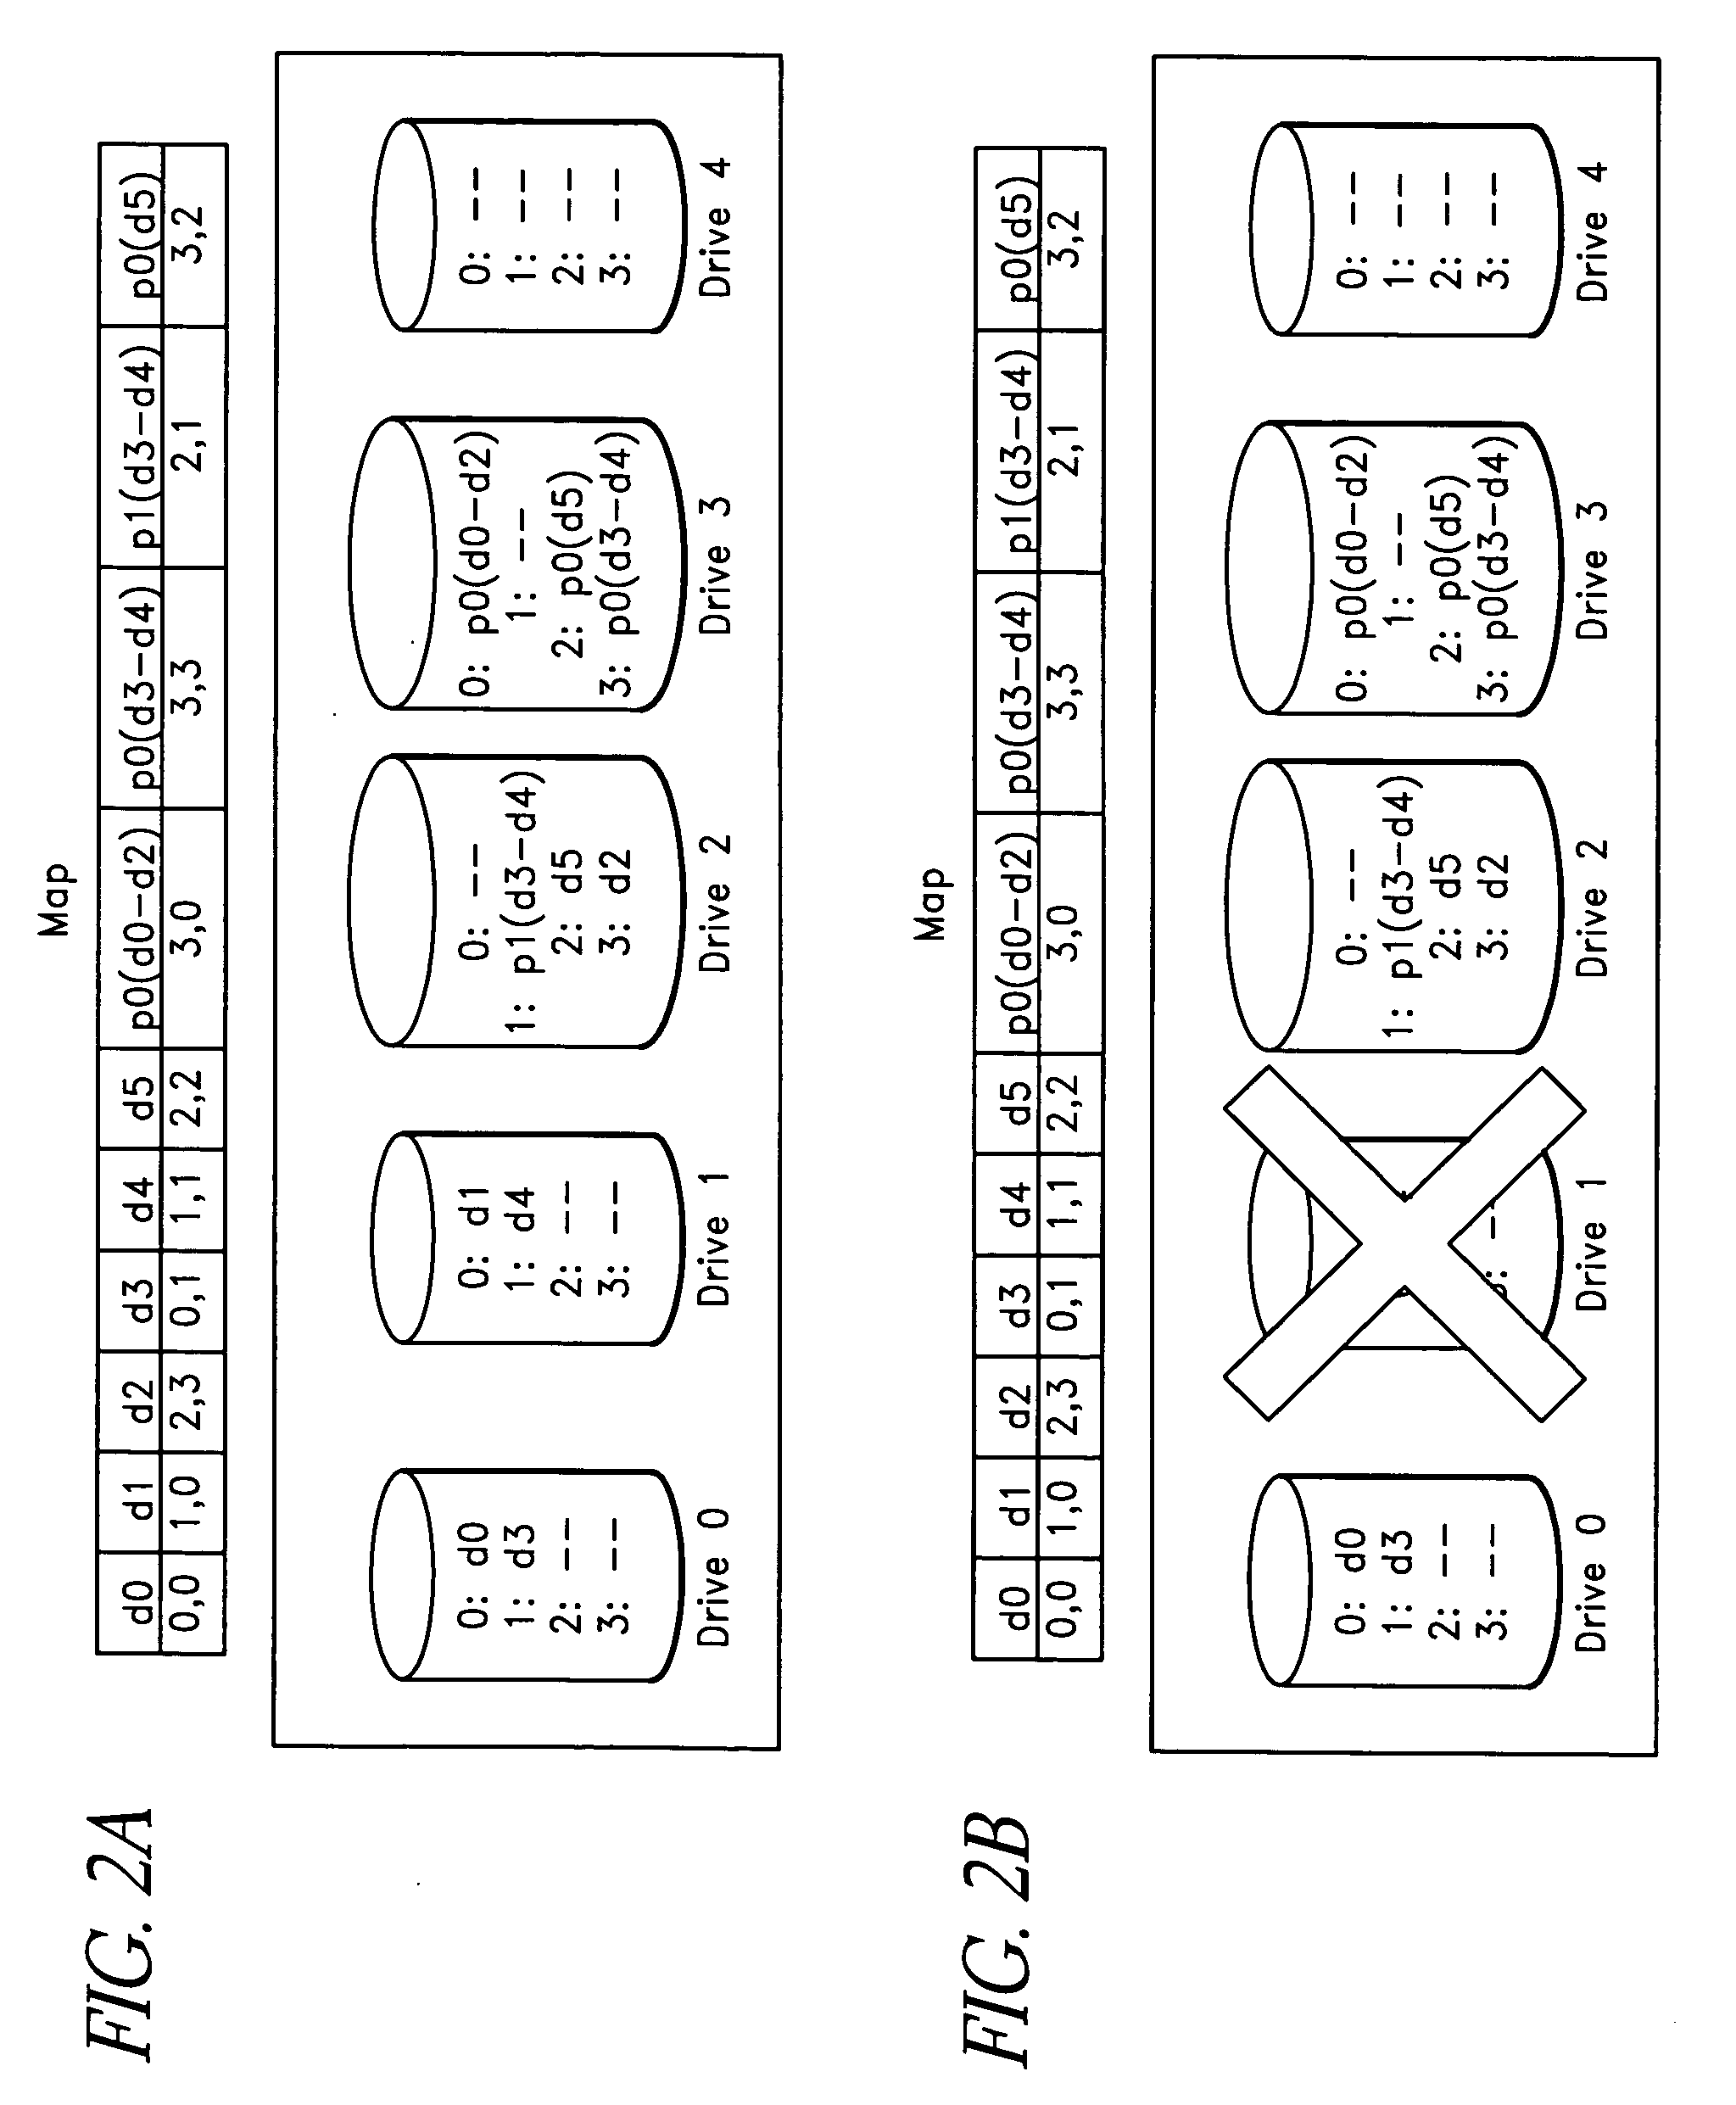 Systems and methods for managing unavailable storage devices